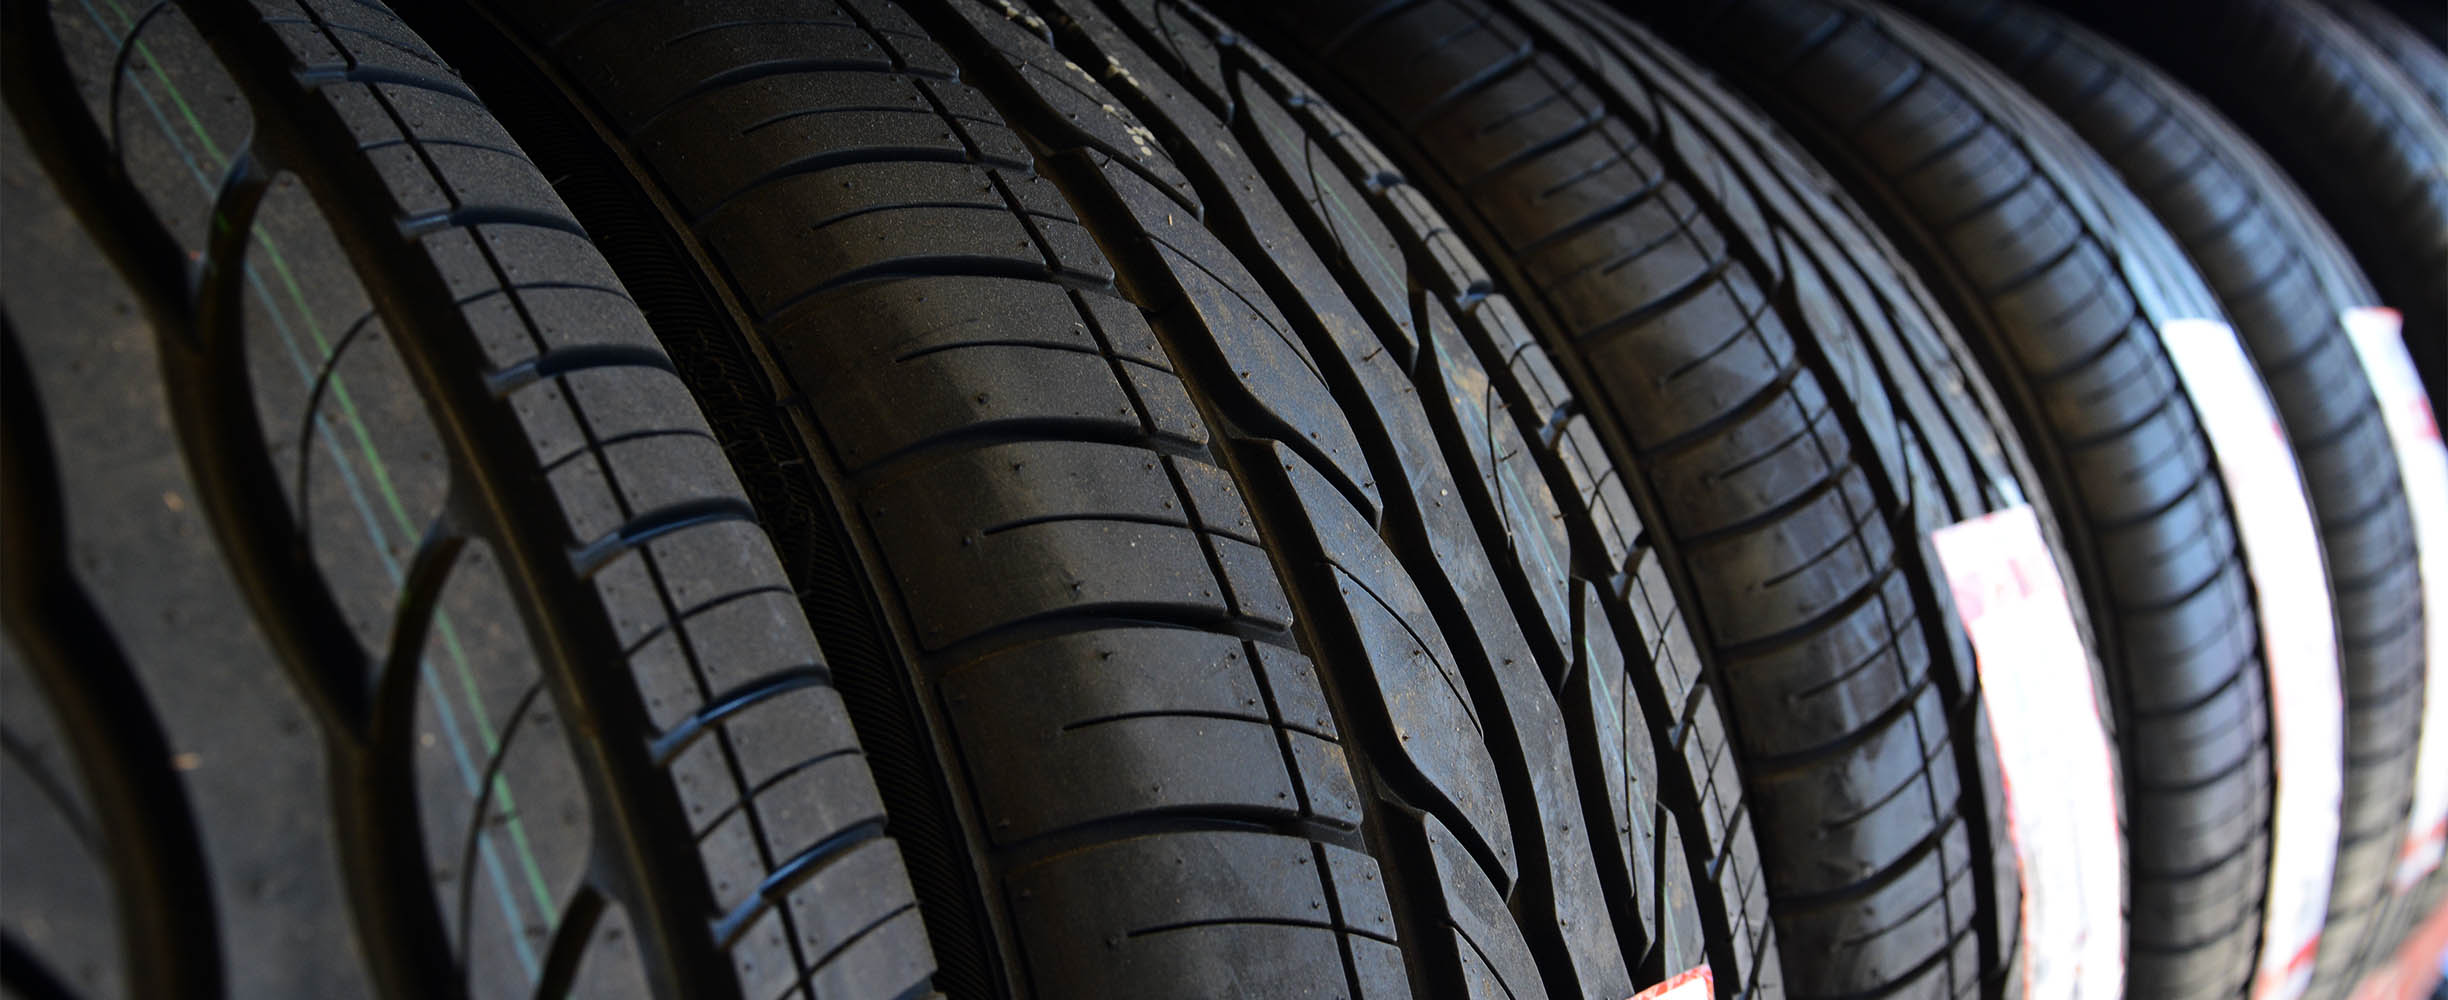 We carry most brands of new tires, and if needed we order tires for you.